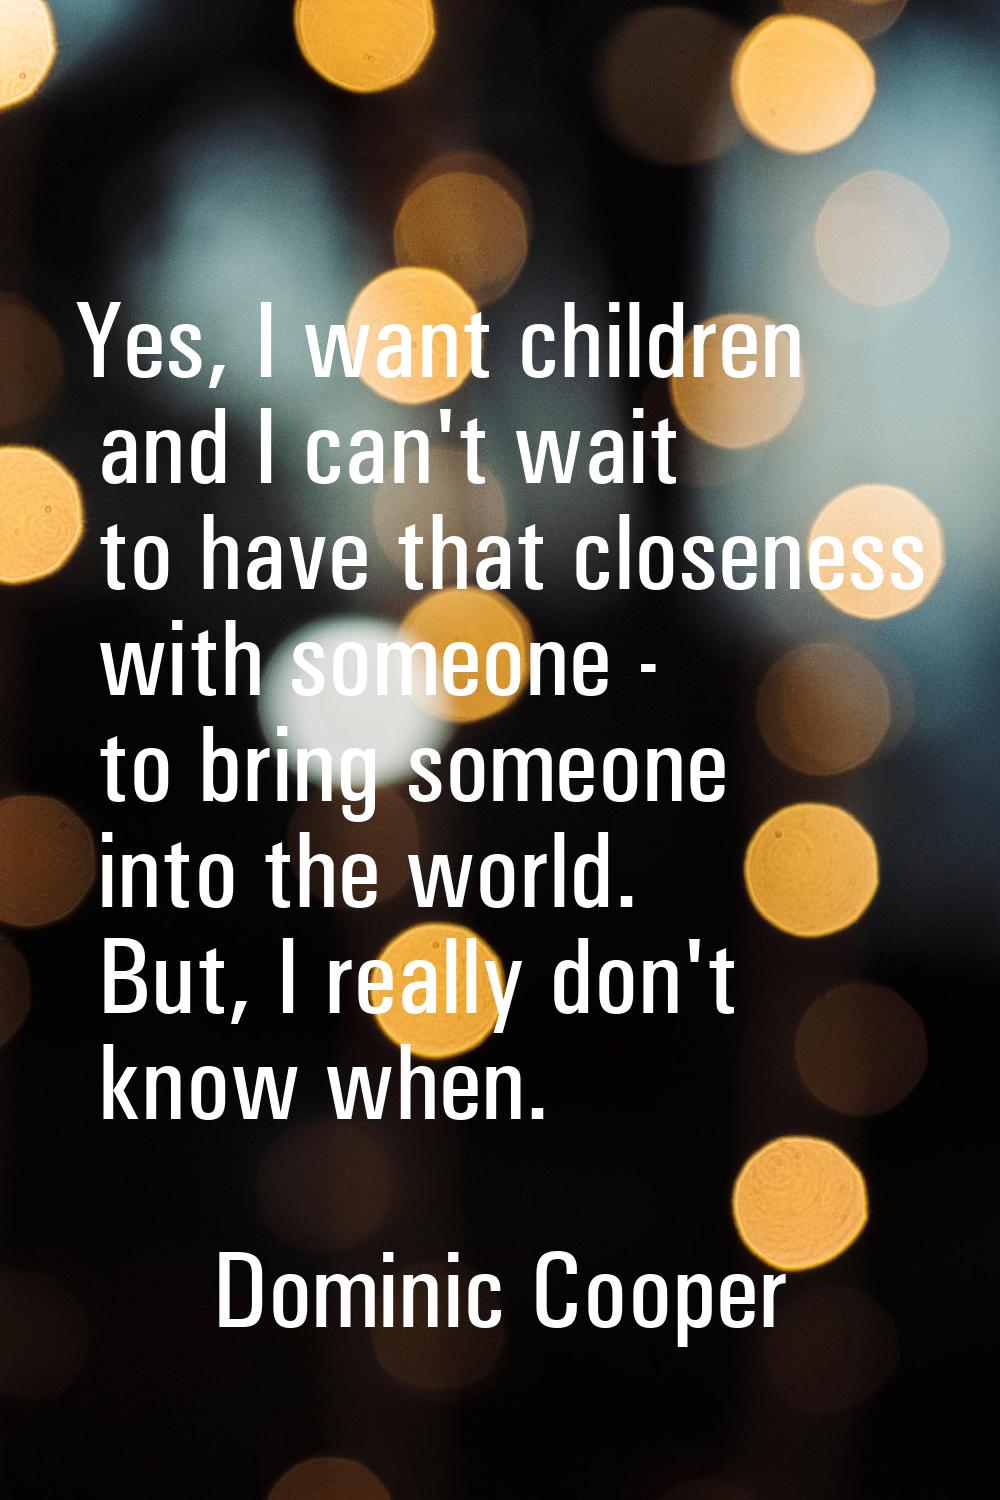 Yes, I want children and I can't wait to have that closeness with someone - to bring someone into t